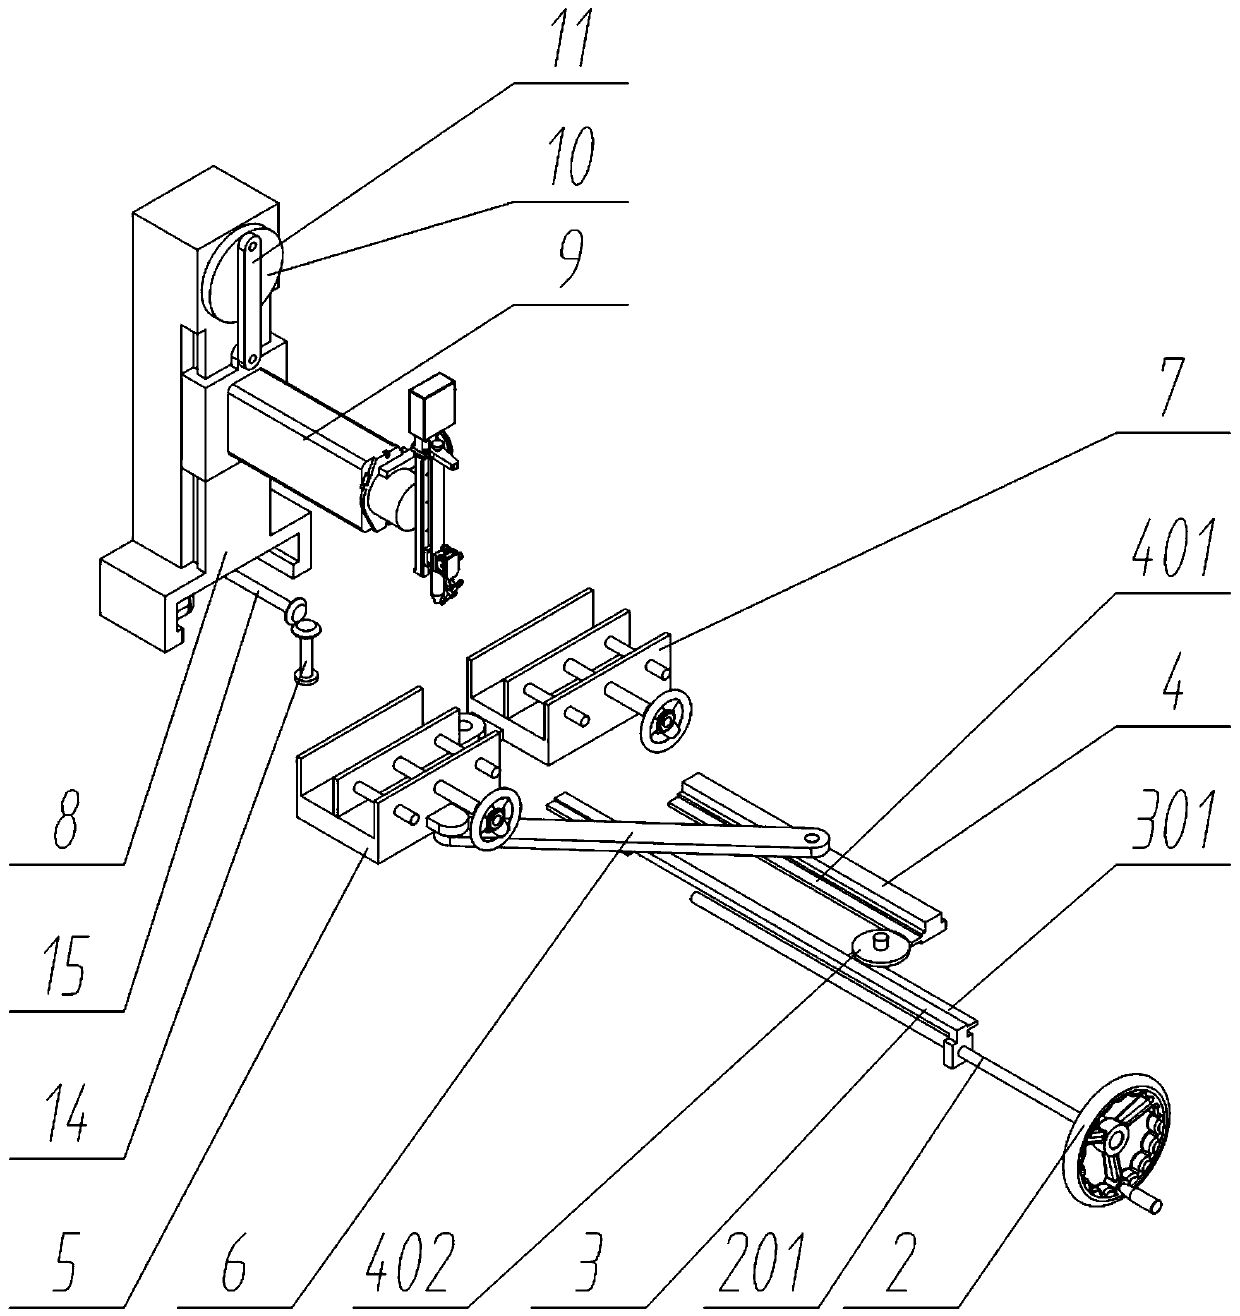 Square tube bending and spot welding device for guardrail production